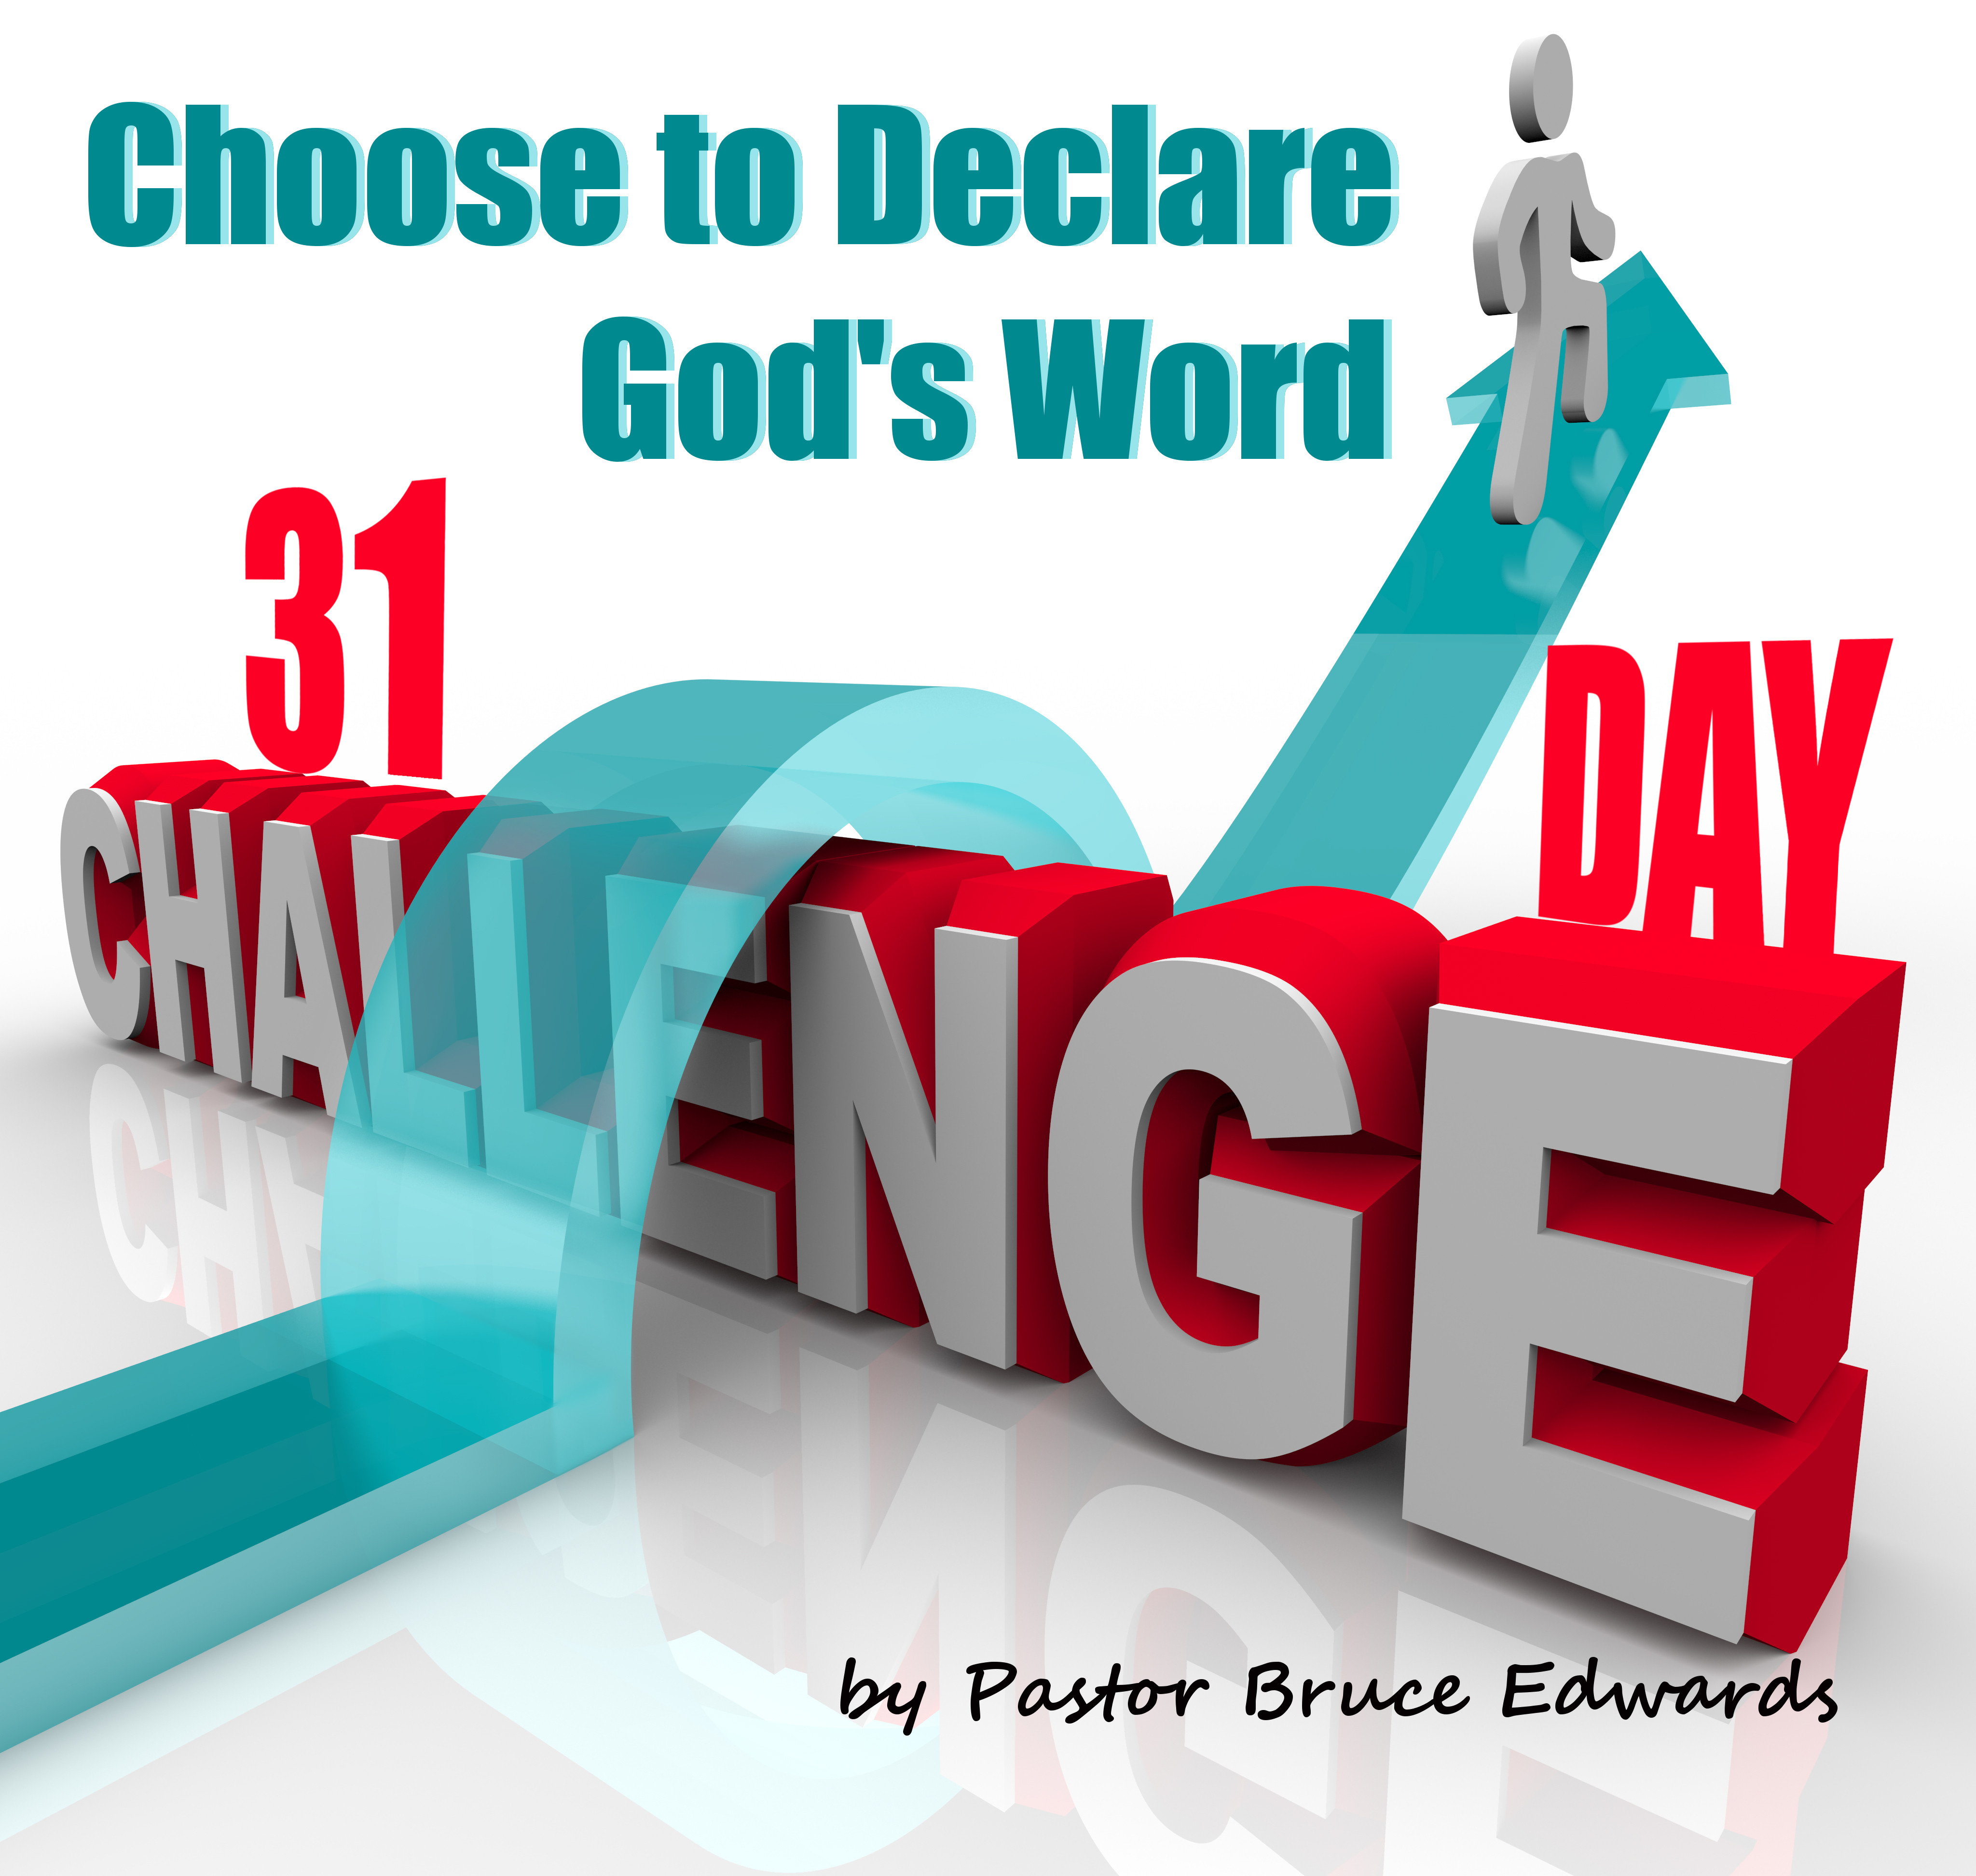 31 declarations of God's Word by pastor bruce edwards